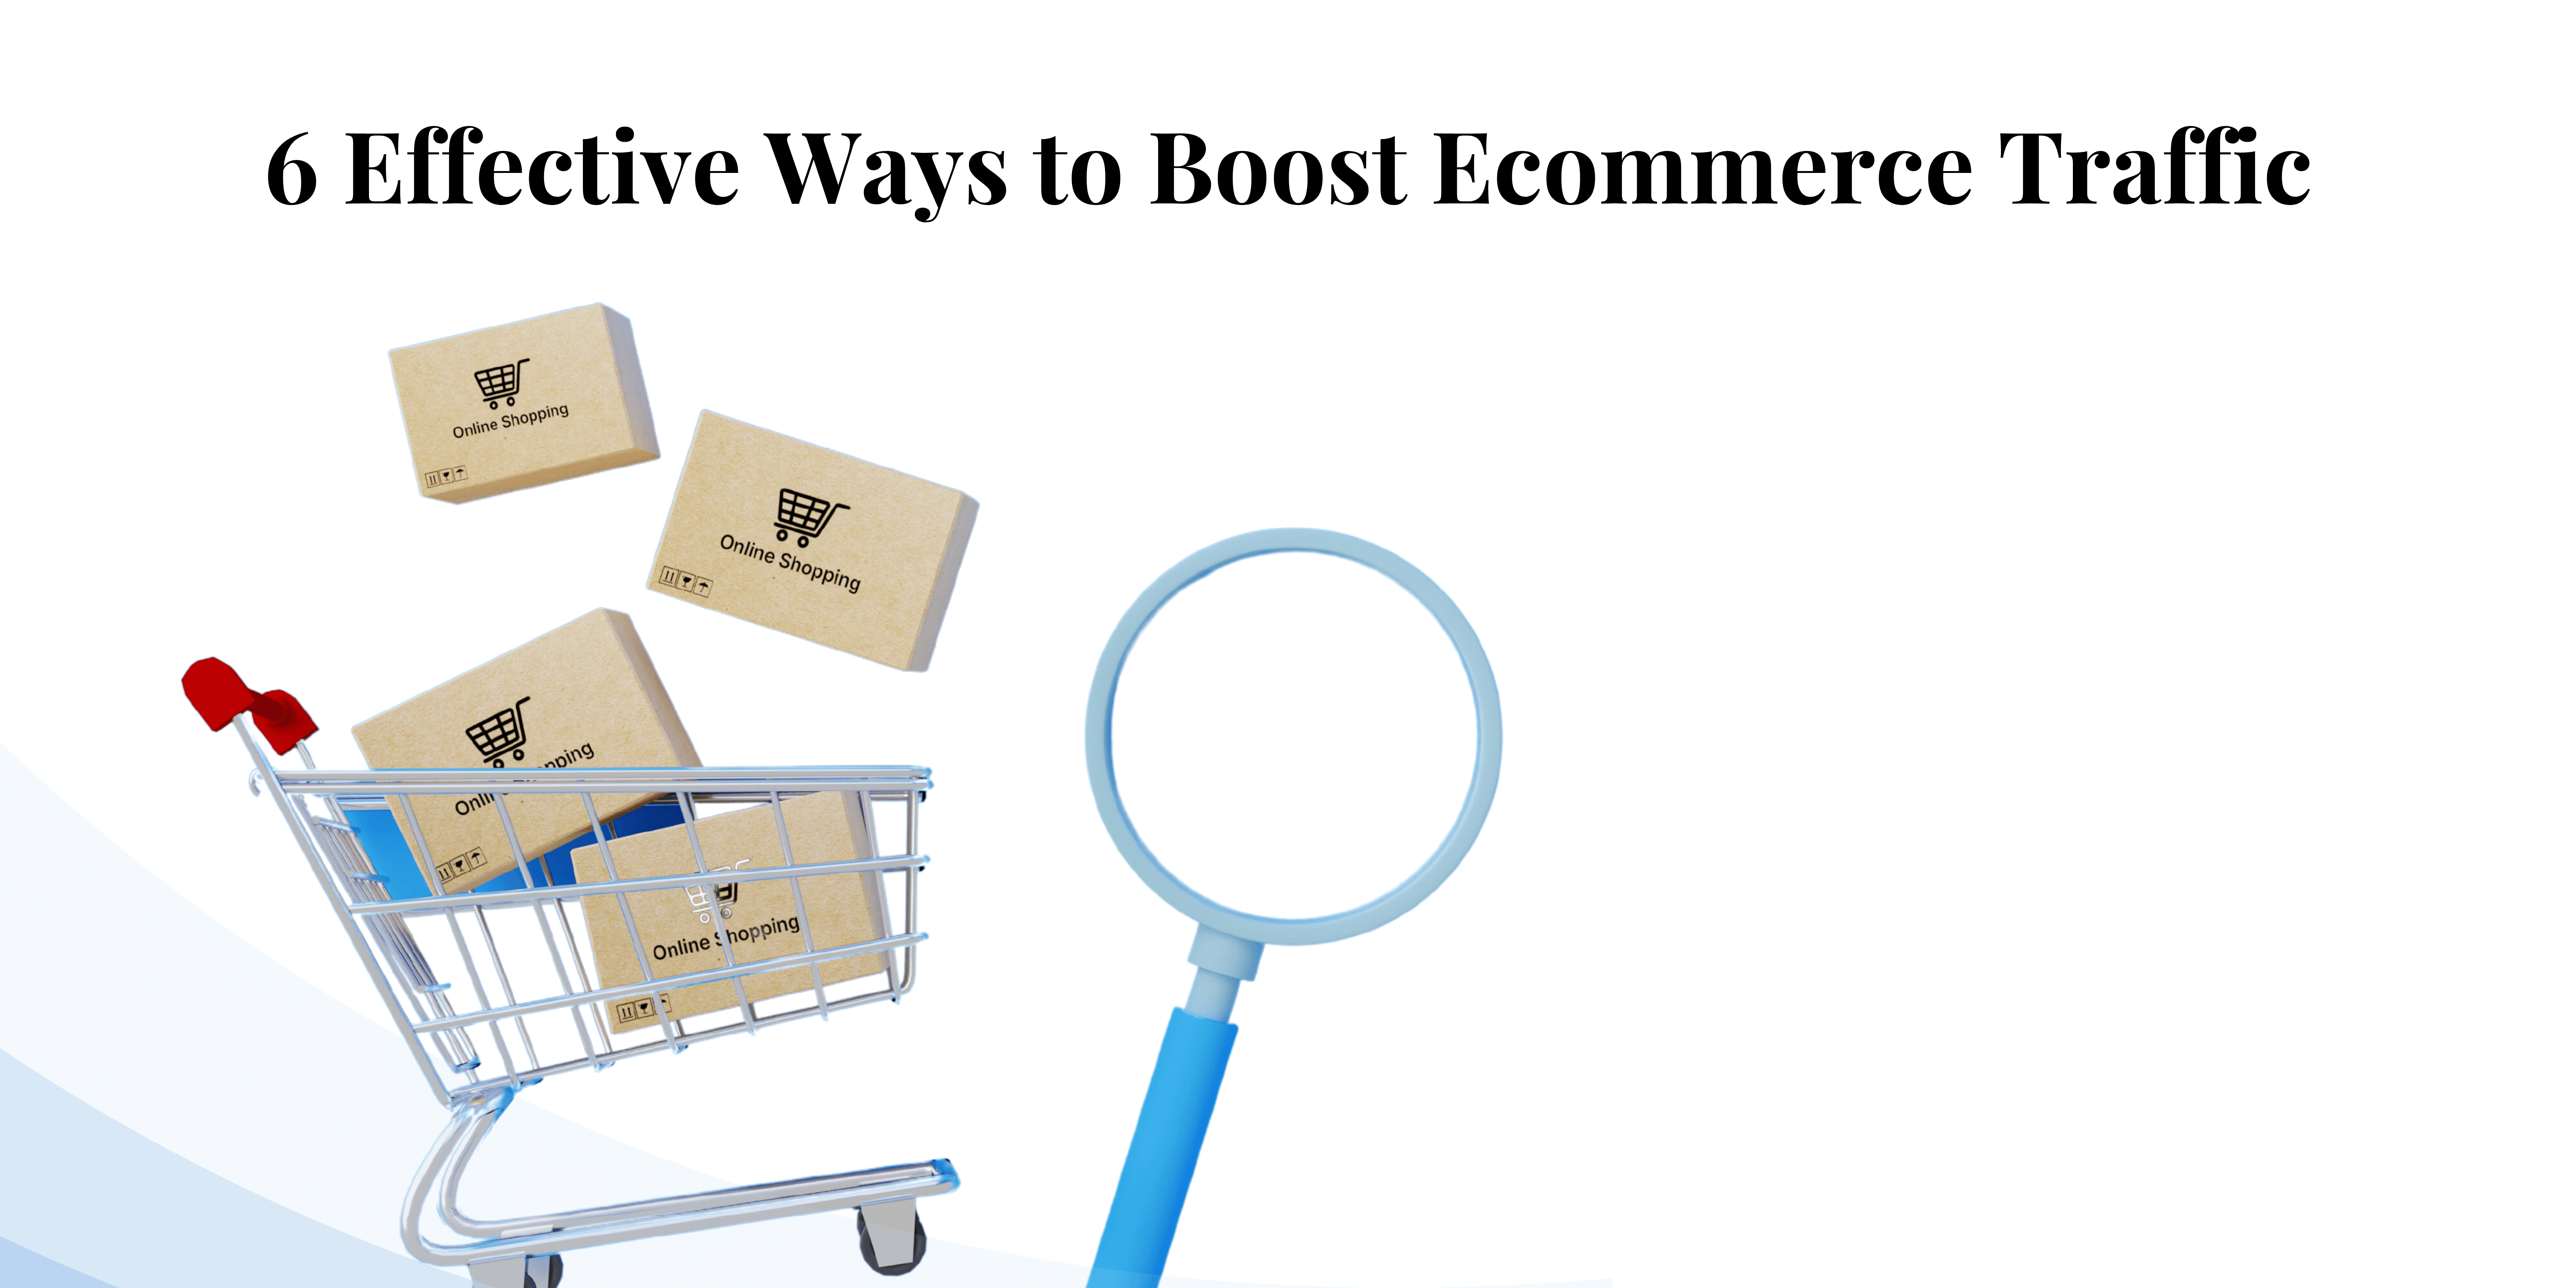 Effectiv ways to boost Ecommerce Traffic